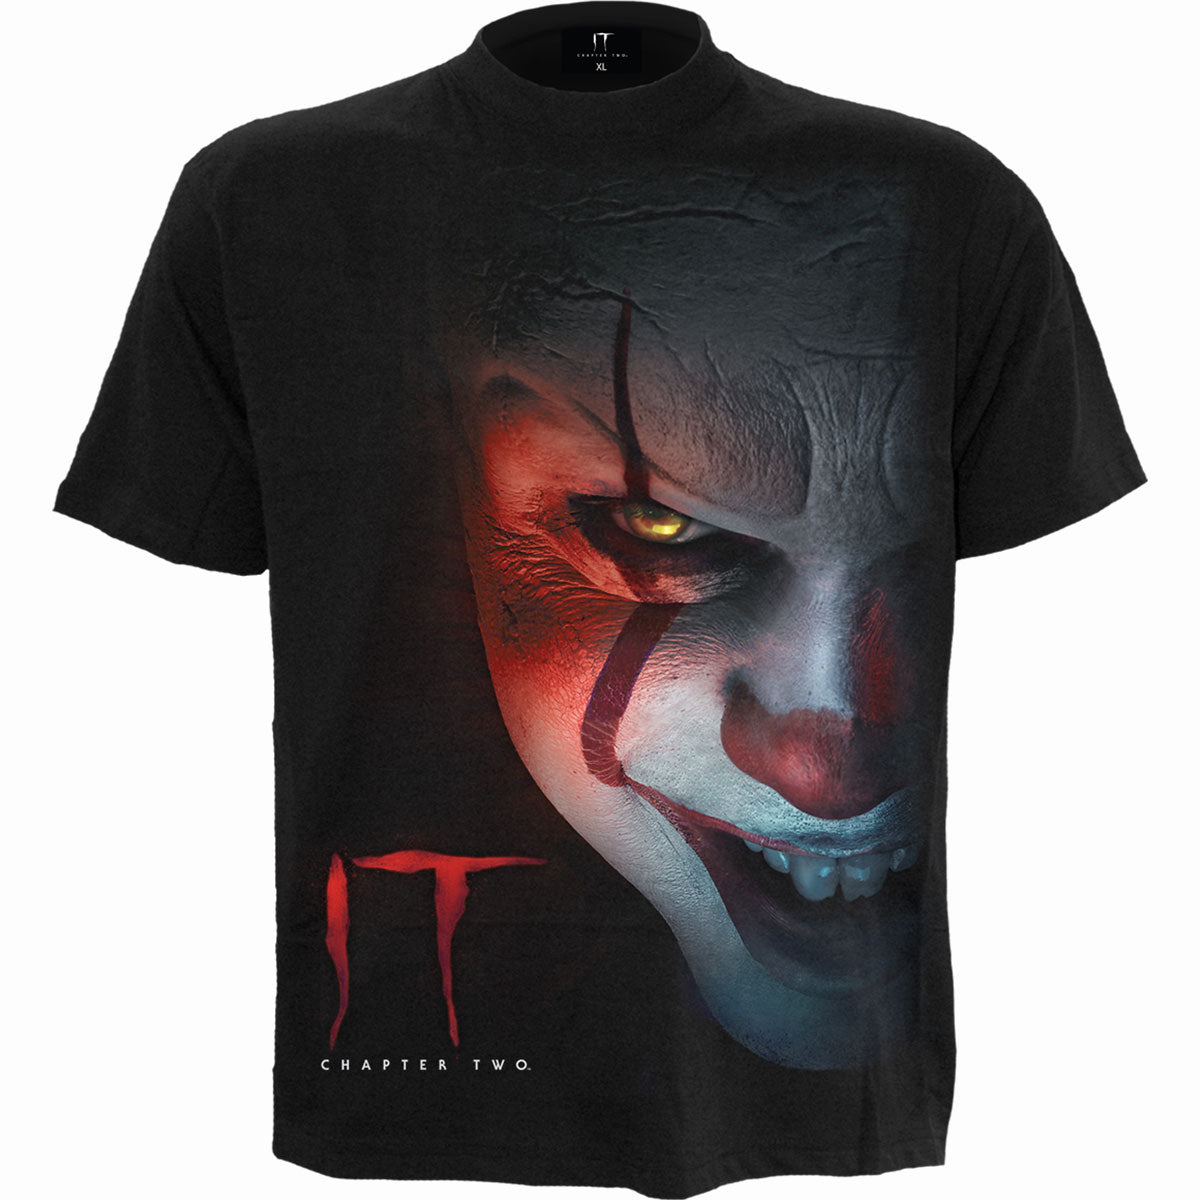 IT - PENNYWISE - T-Shirt Black